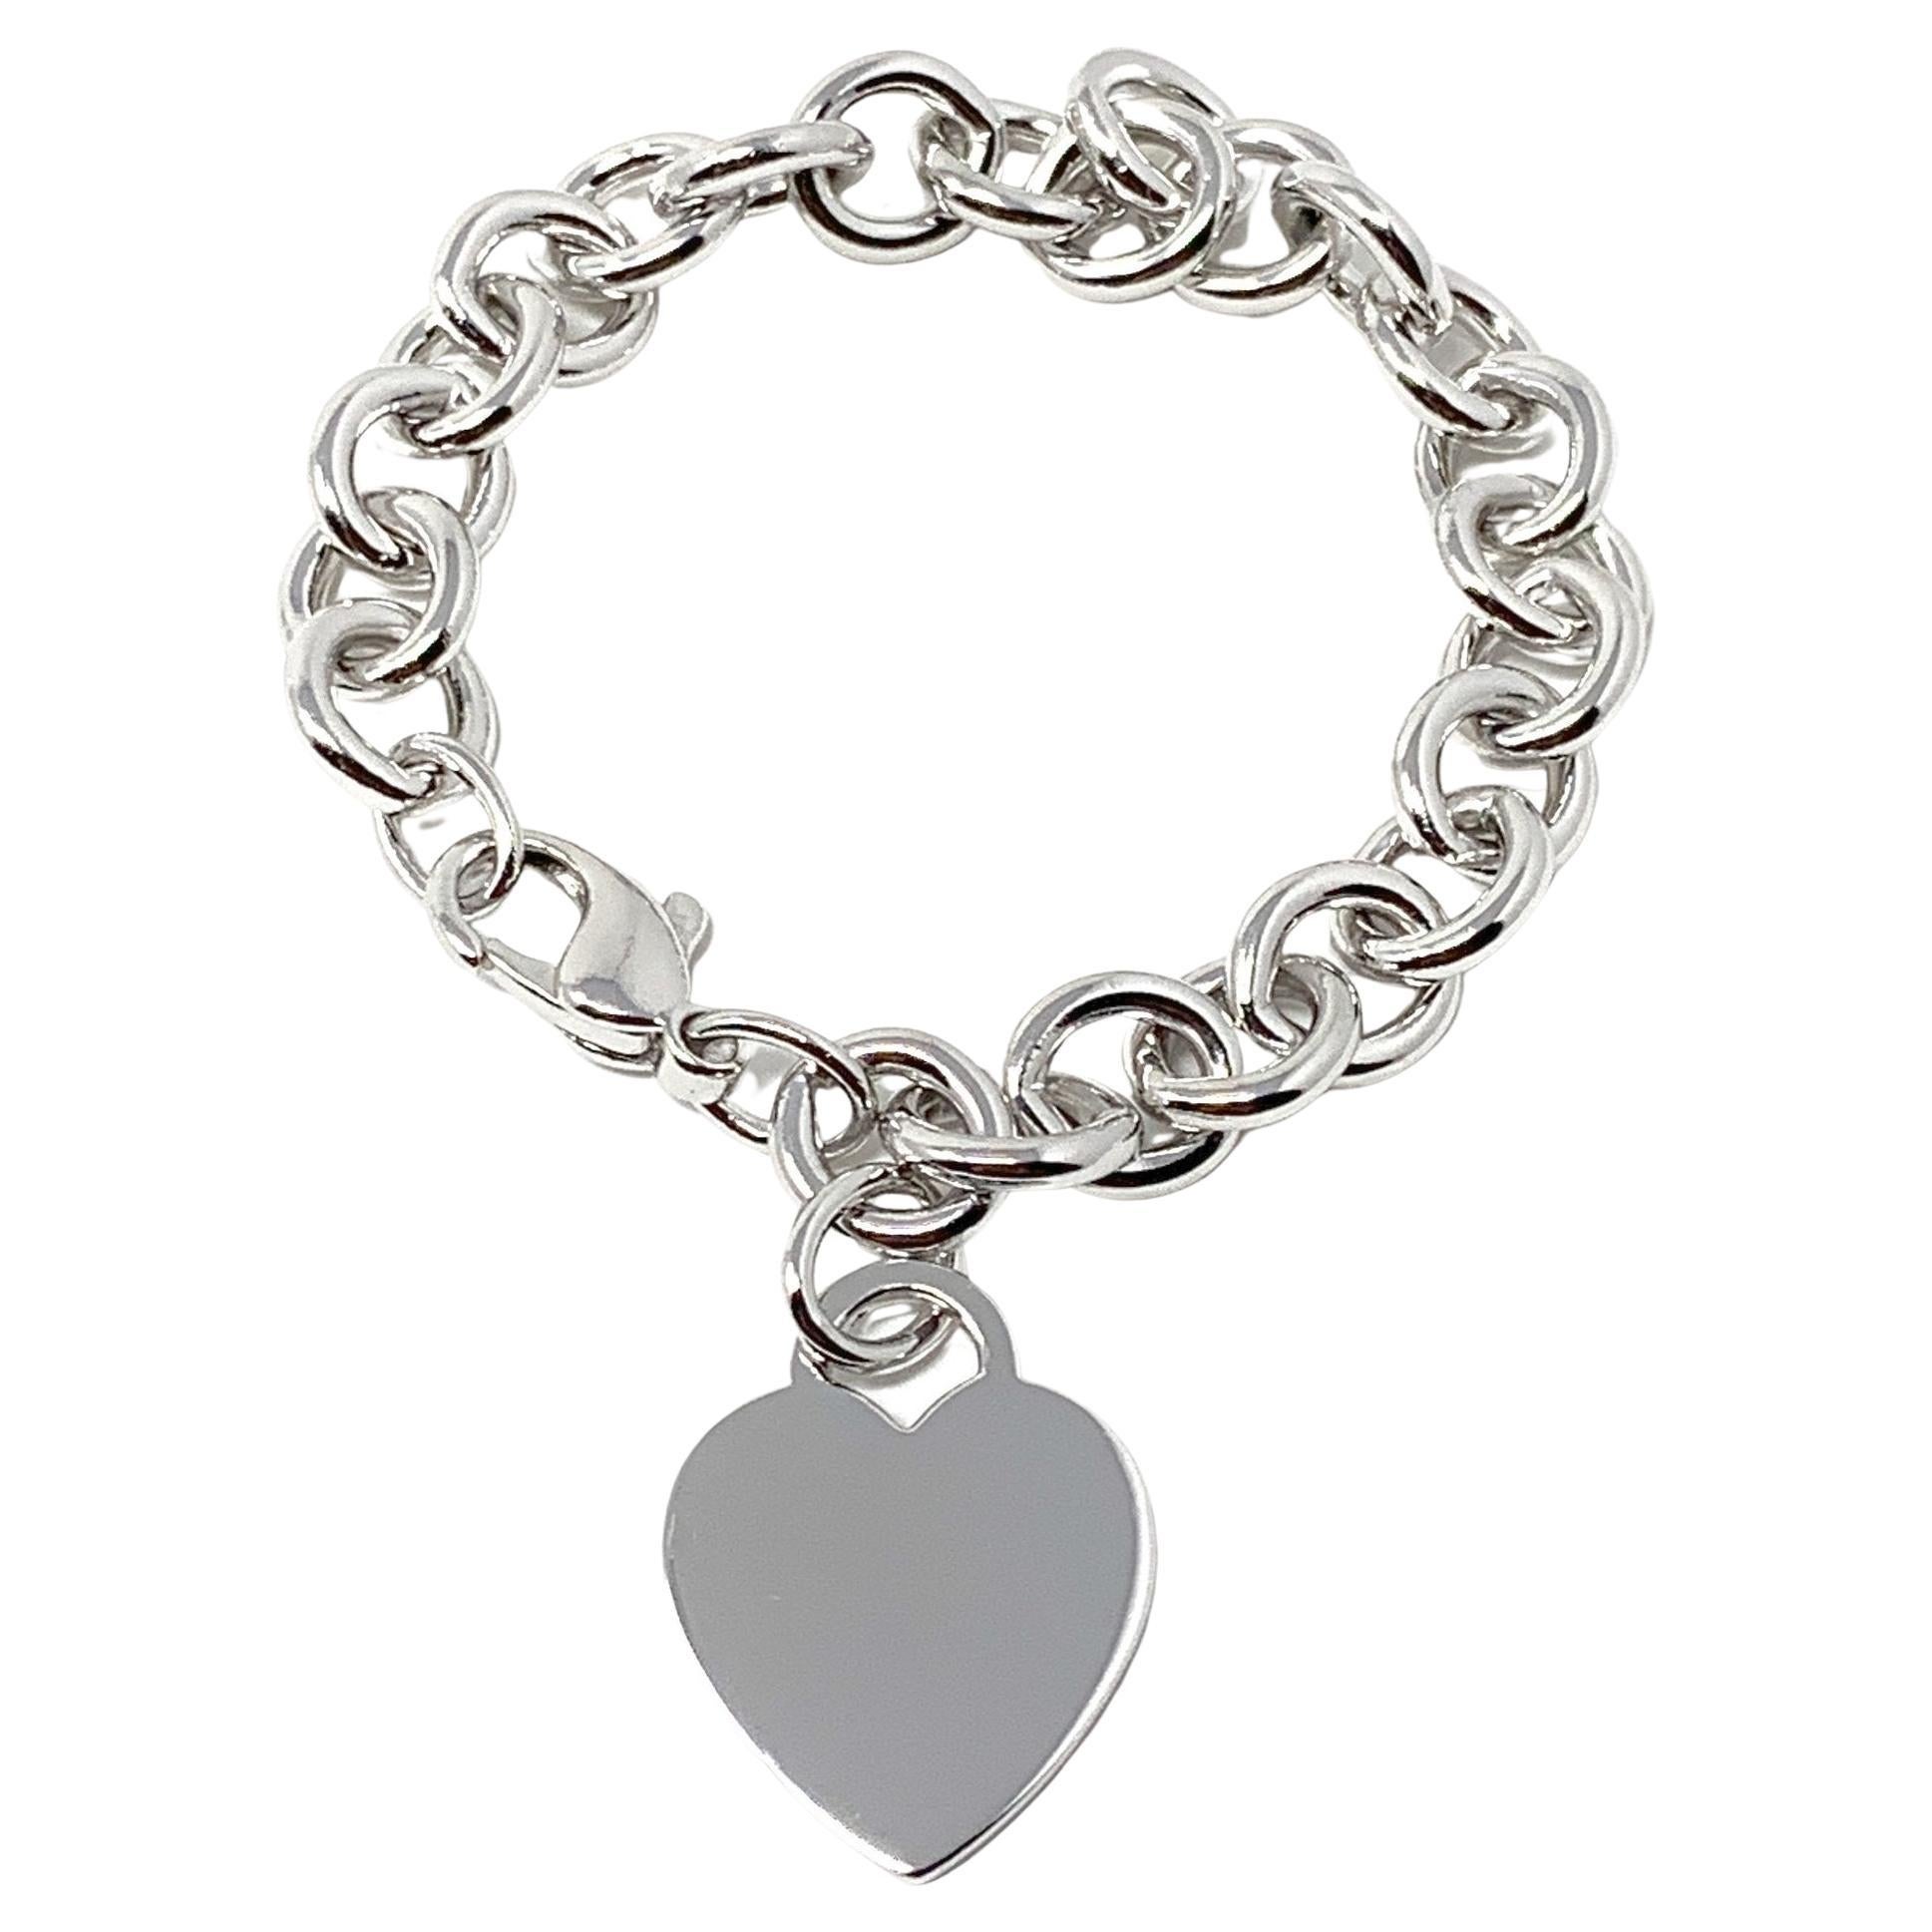 Tiffany & Co. Silver Heart Charm White Gold Plated Bracelet